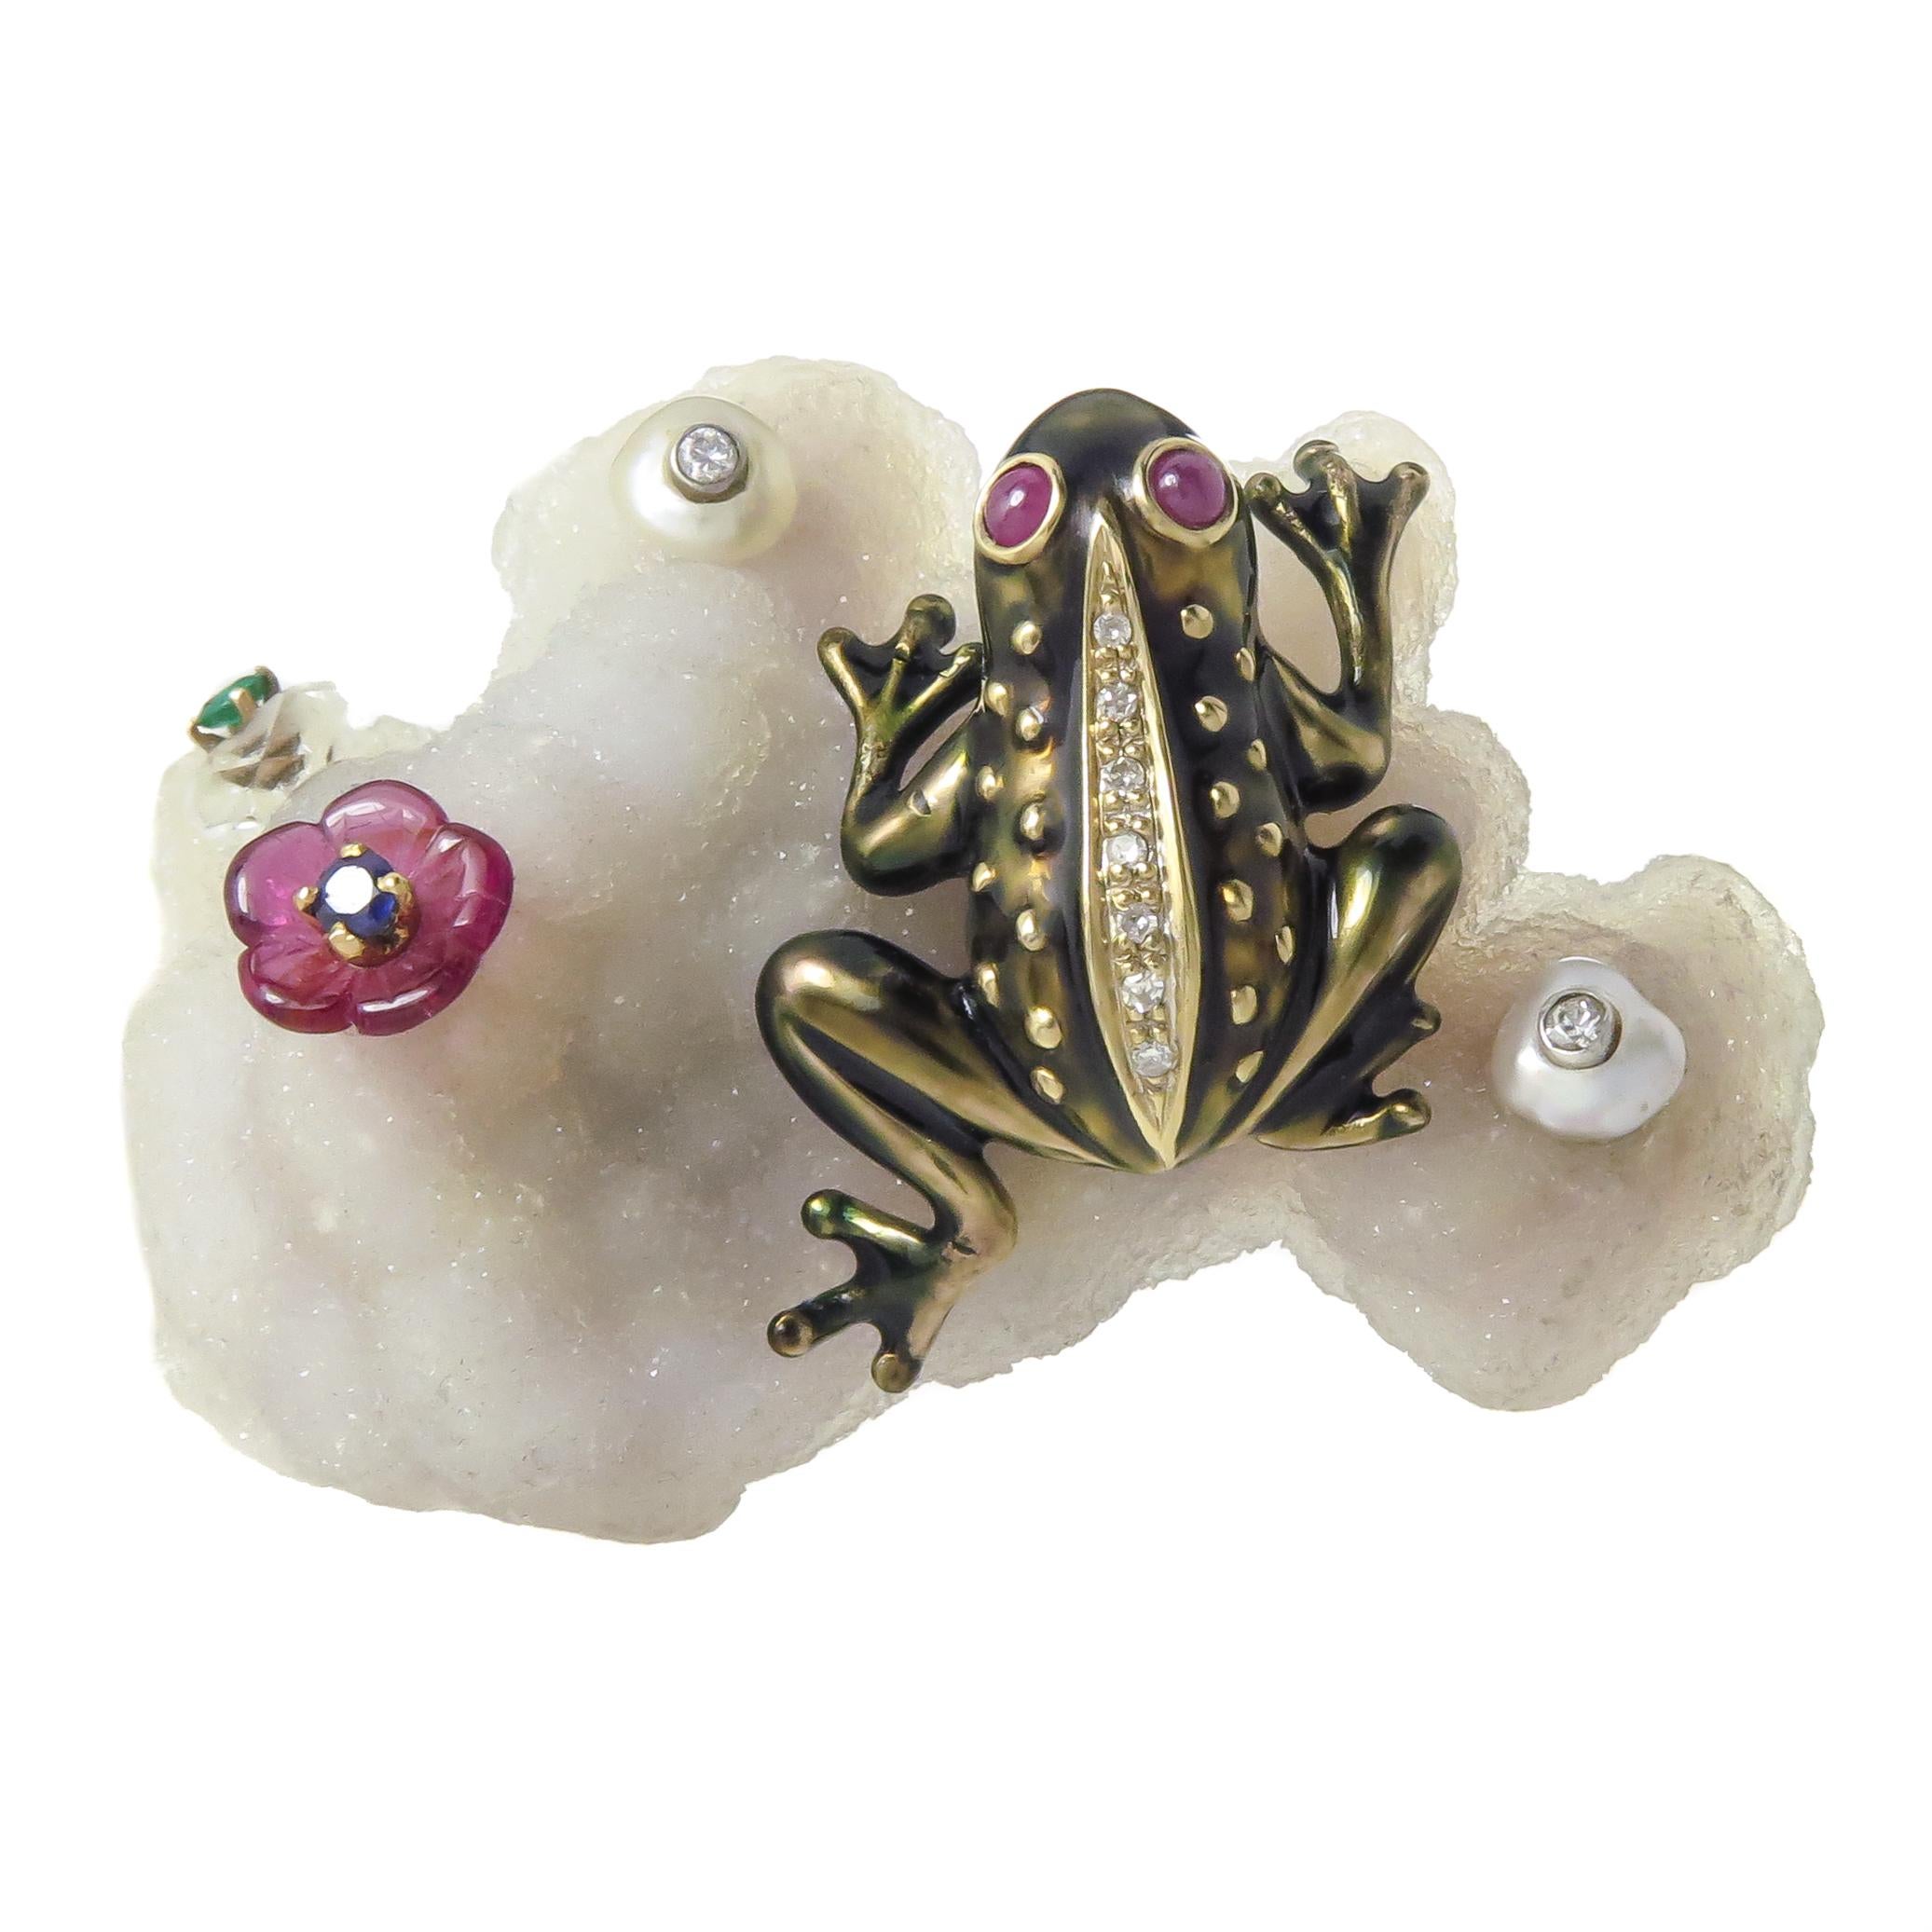 Circa 1970 Seaman Schepps unique clip Brooch. An 18K Yellow Gold Frog measuring 1 1/4 X 7/8 inch perched on top of a White Geode Quartz stone measuring 2 X 1 1/2 inches. The Frog is finished in a light Brown Enamel and is set with Diamonds and Ruby